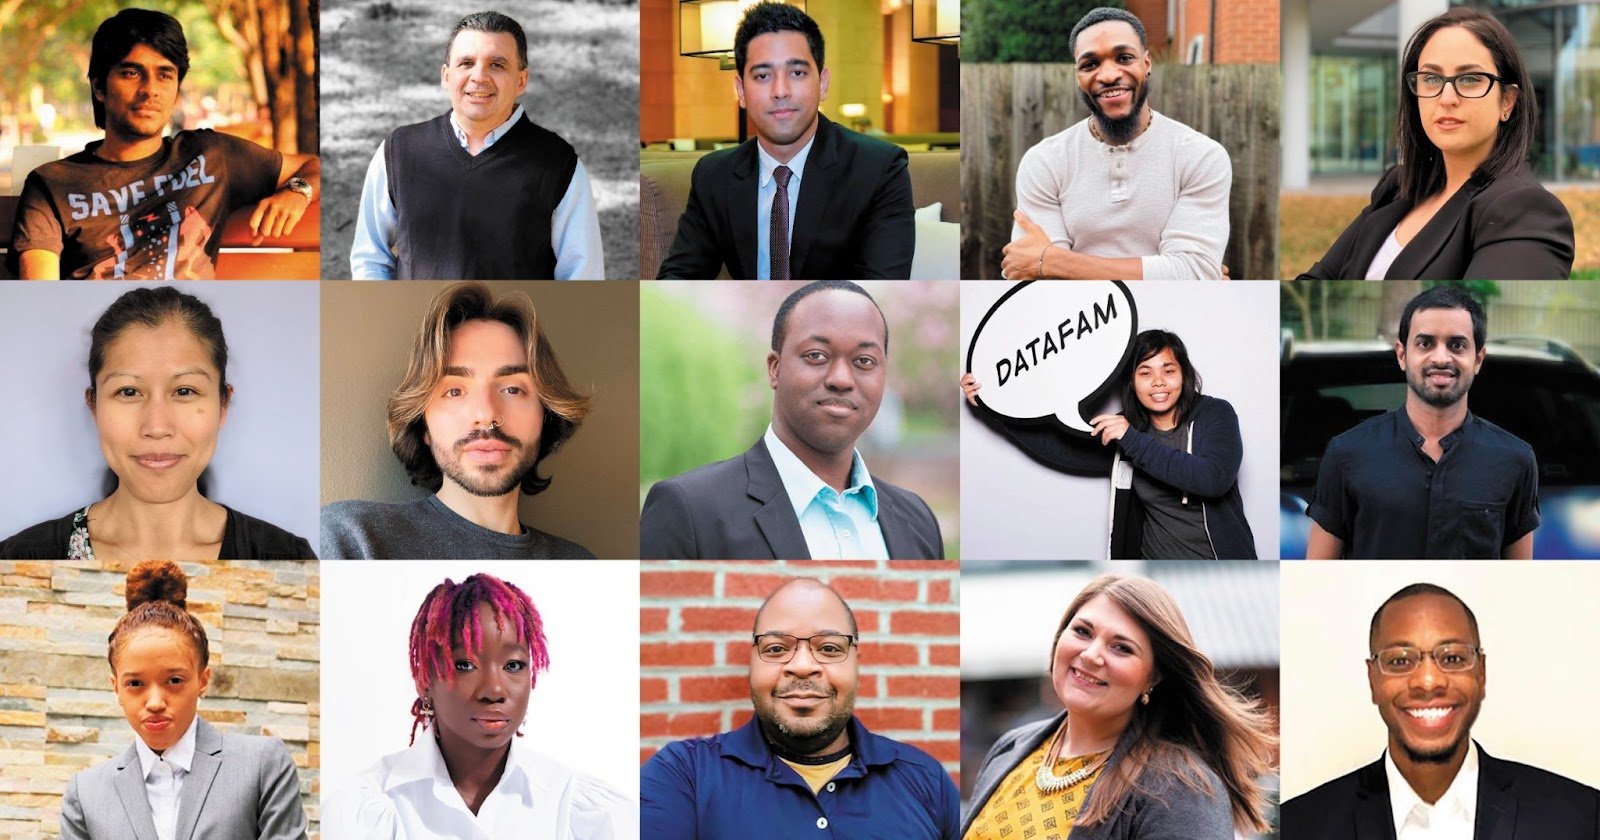 The 15 members of the Community Equity Task Force - their headshots shared